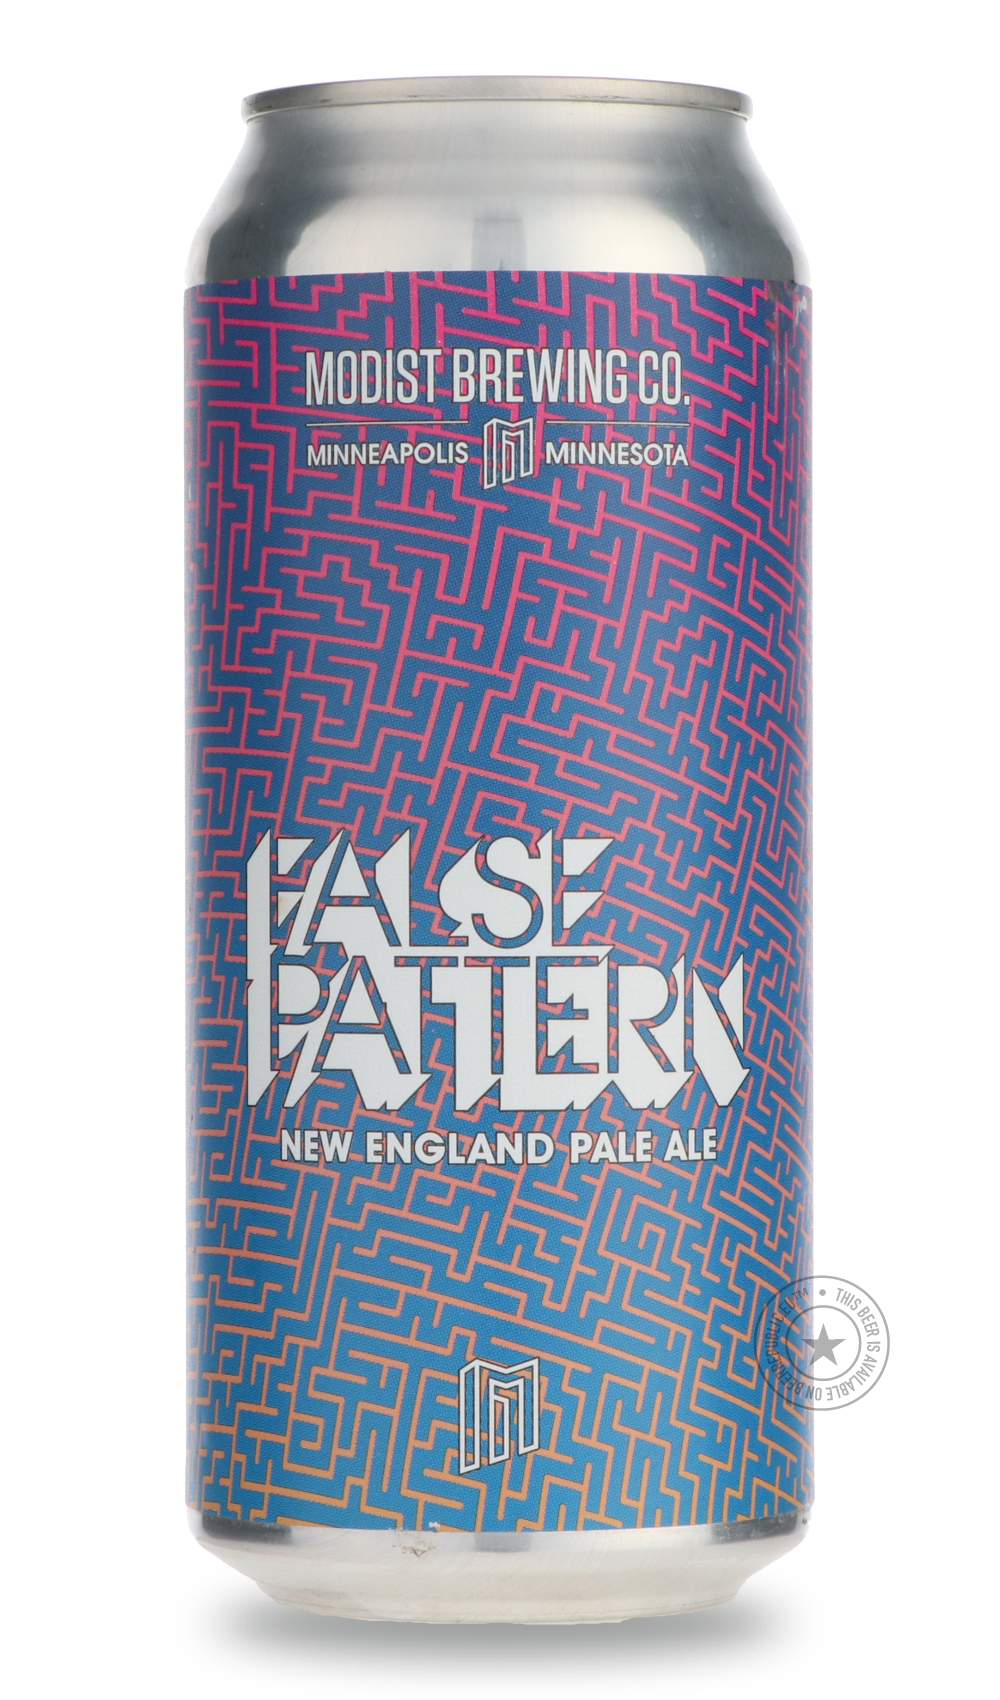 -Modist- False Pattern-IPA- Only @ Beer Republic - The best online beer store for American & Canadian craft beer - Buy beer online from the USA and Canada - Bier online kopen - Amerikaans bier kopen - Craft beer store - Craft beer kopen - Amerikanisch bier kaufen - Bier online kaufen - Acheter biere online - IPA - Stout - Porter - New England IPA - Hazy IPA - Imperial Stout - Barrel Aged - Barrel Aged Imperial Stout - Brown - Dark beer - Blond - Blonde - Pilsner - Lager - Wheat - Weizen - Amber - Barley Win